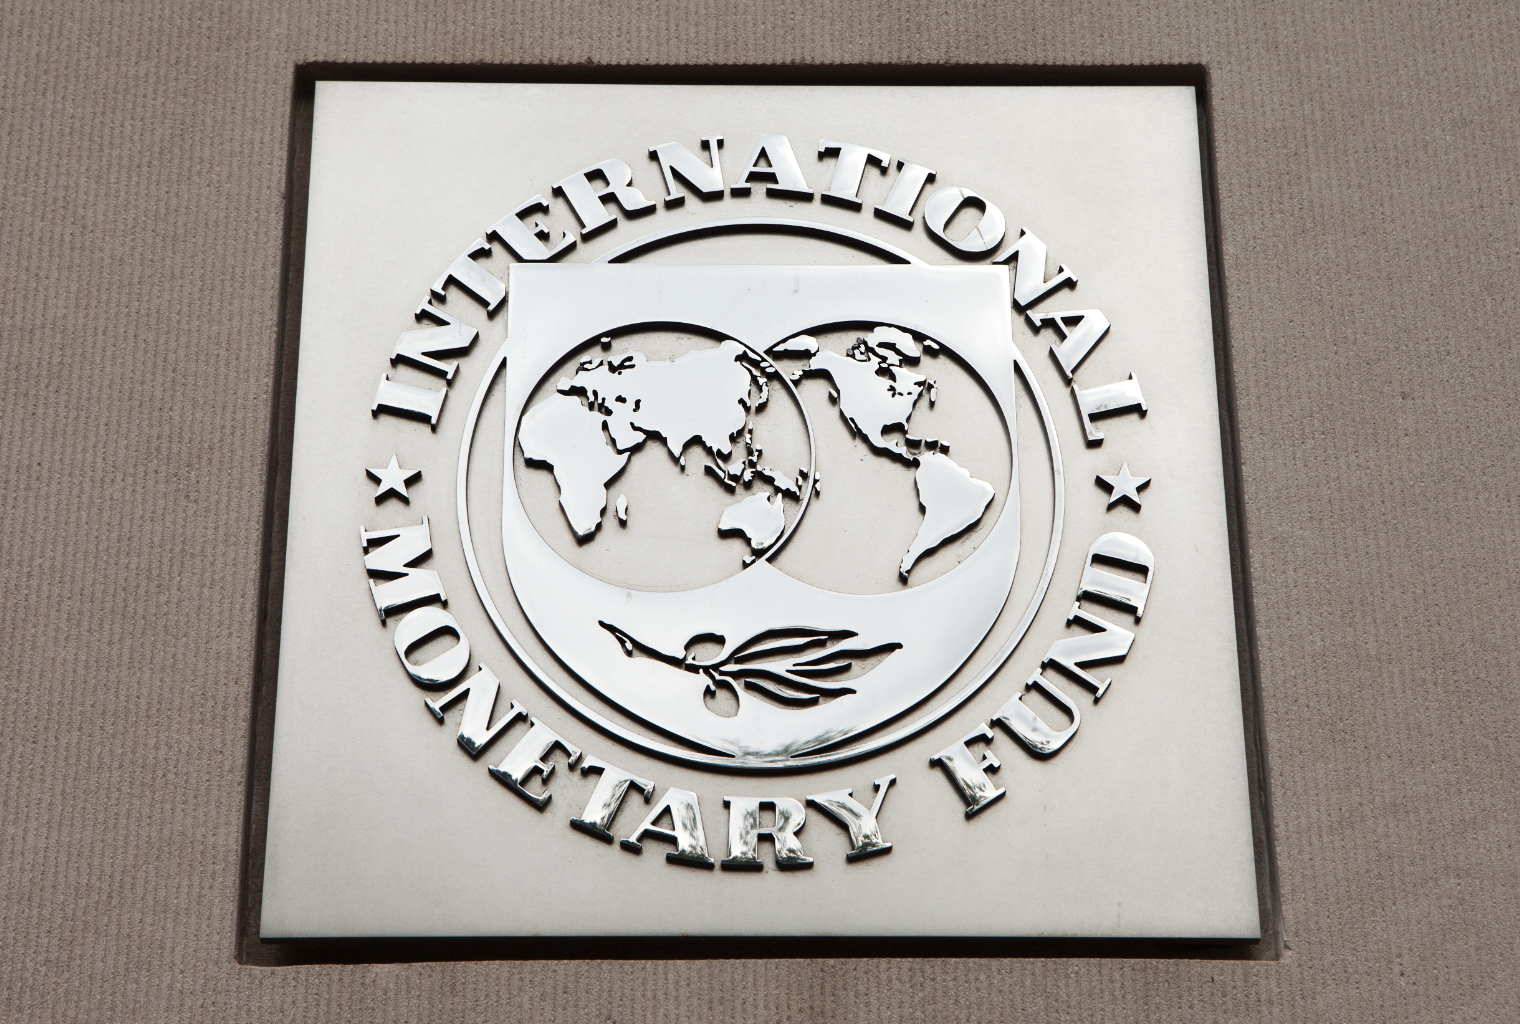 IMF Says Recession Is Here, 80 Countries Request Help, Trillions of Dollars Needed